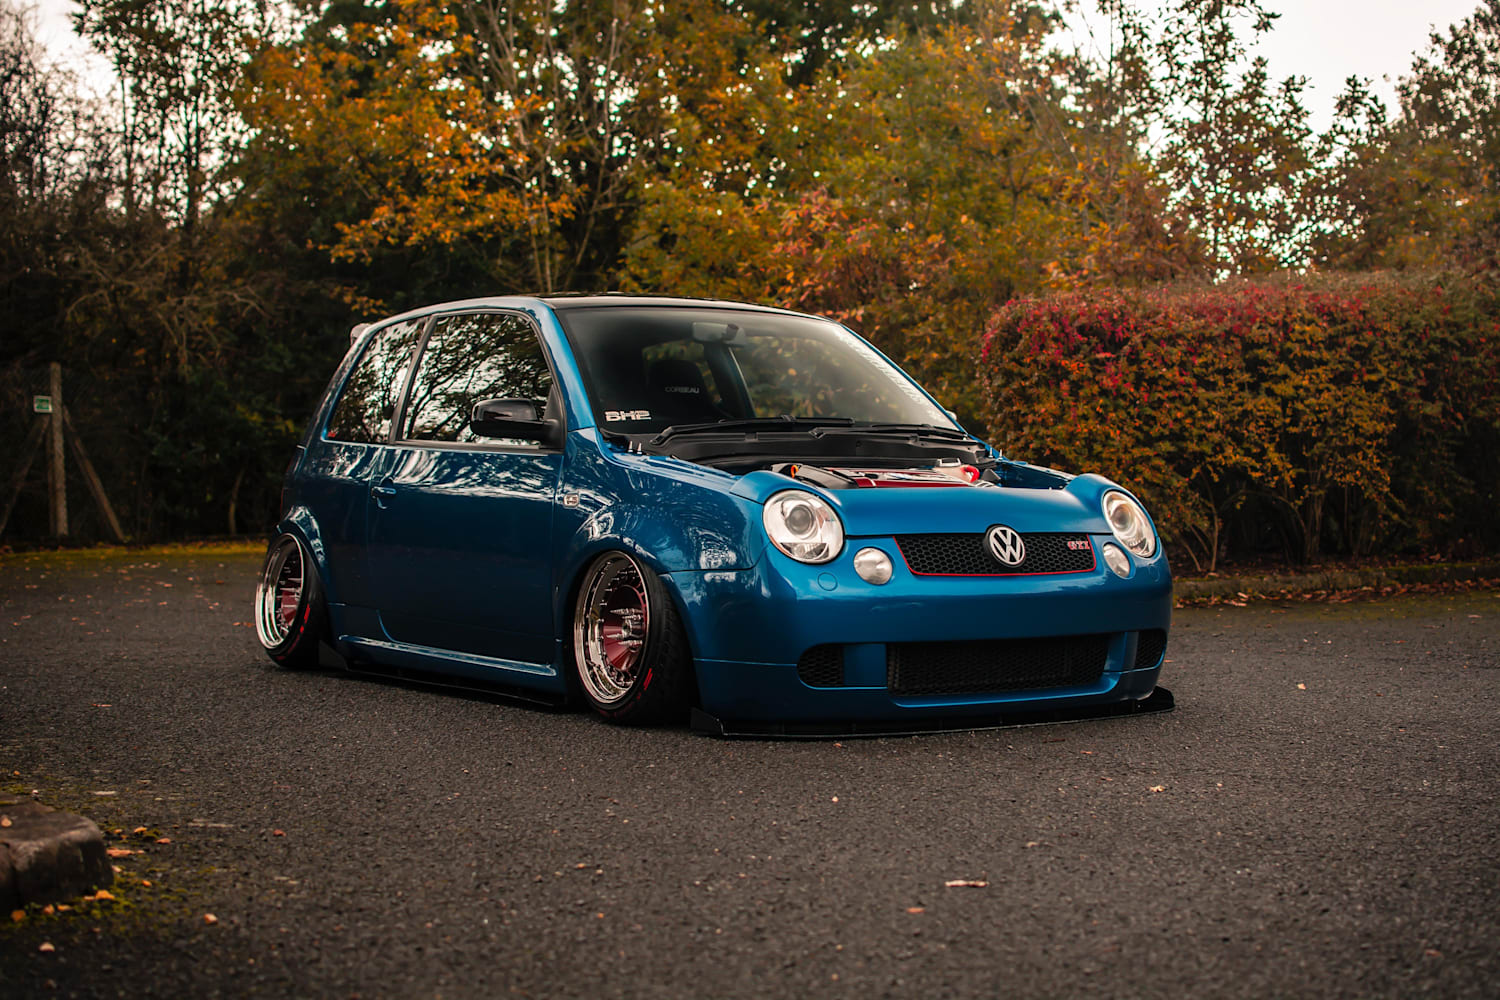 Modified Vw Lupo Gti Interview With Owner Harley Smith